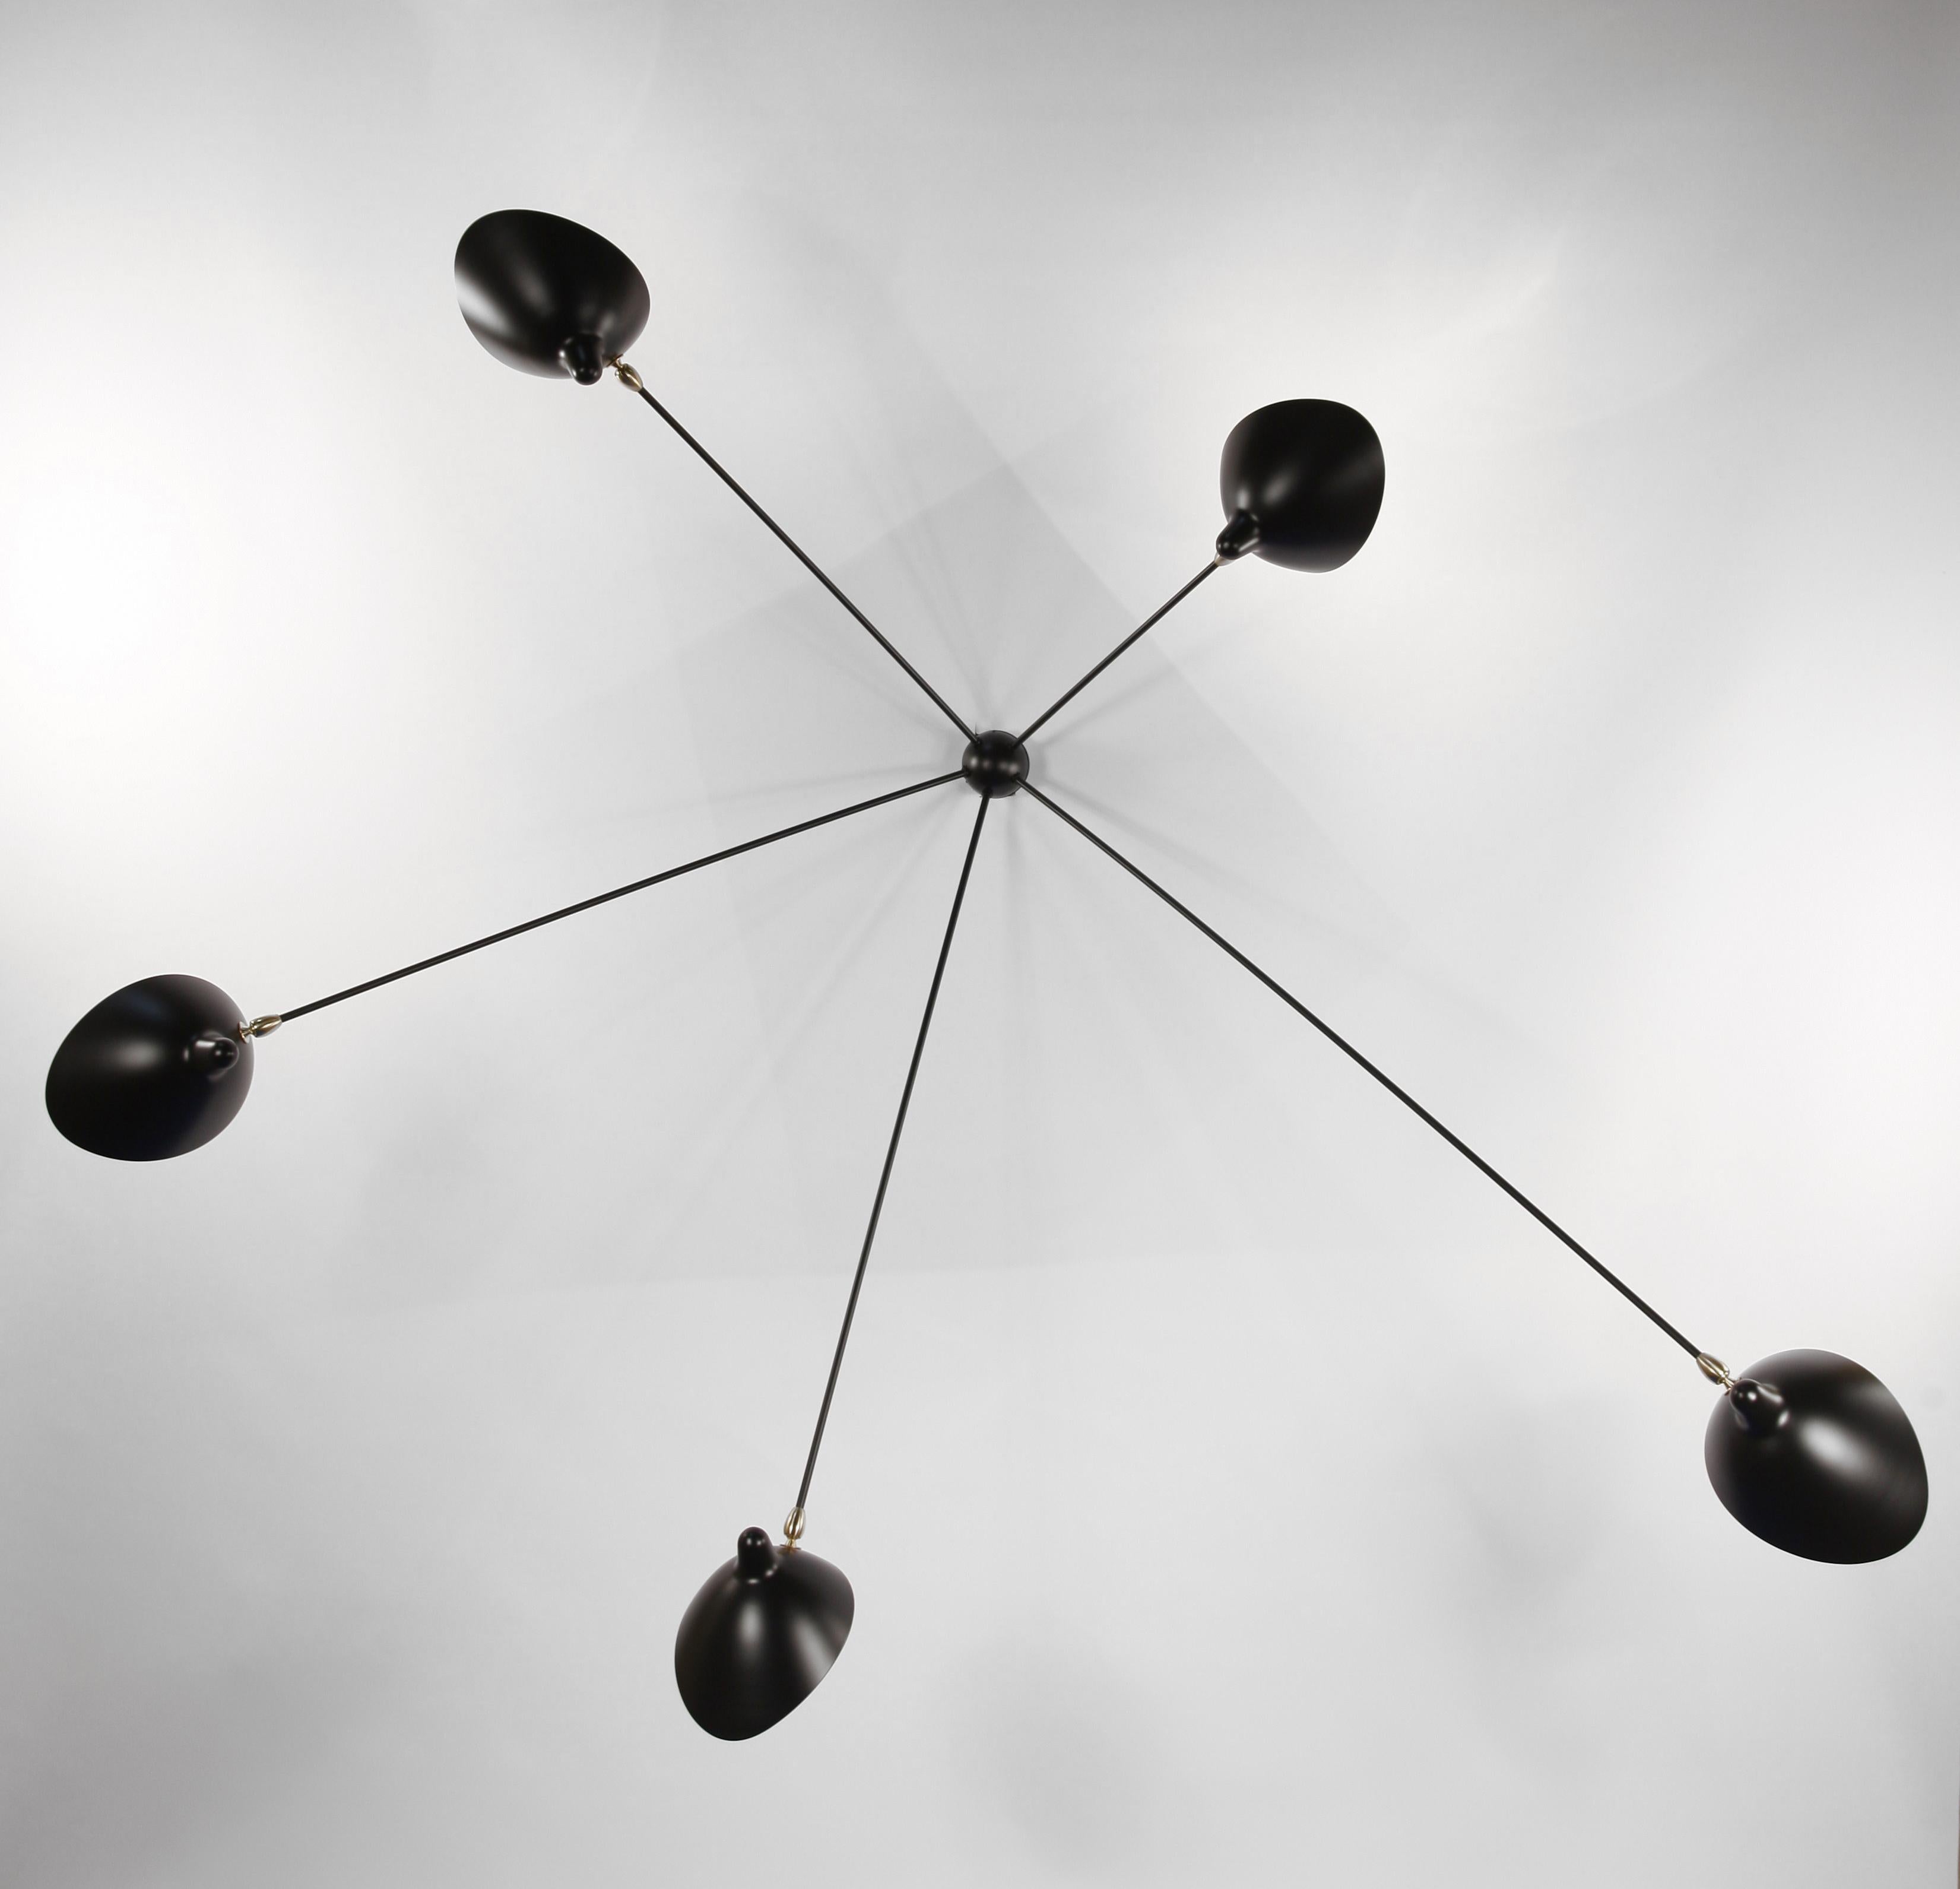 Ceiling wall lamp model 'Five Fixed Arms Spider Wall Lamp' designed by Serge Mouille in 1953.

Manufactured by Editions Serge Mouille in France. The production of lamps, wall lights and floor lamps are manufactured using craftsman’s techniques